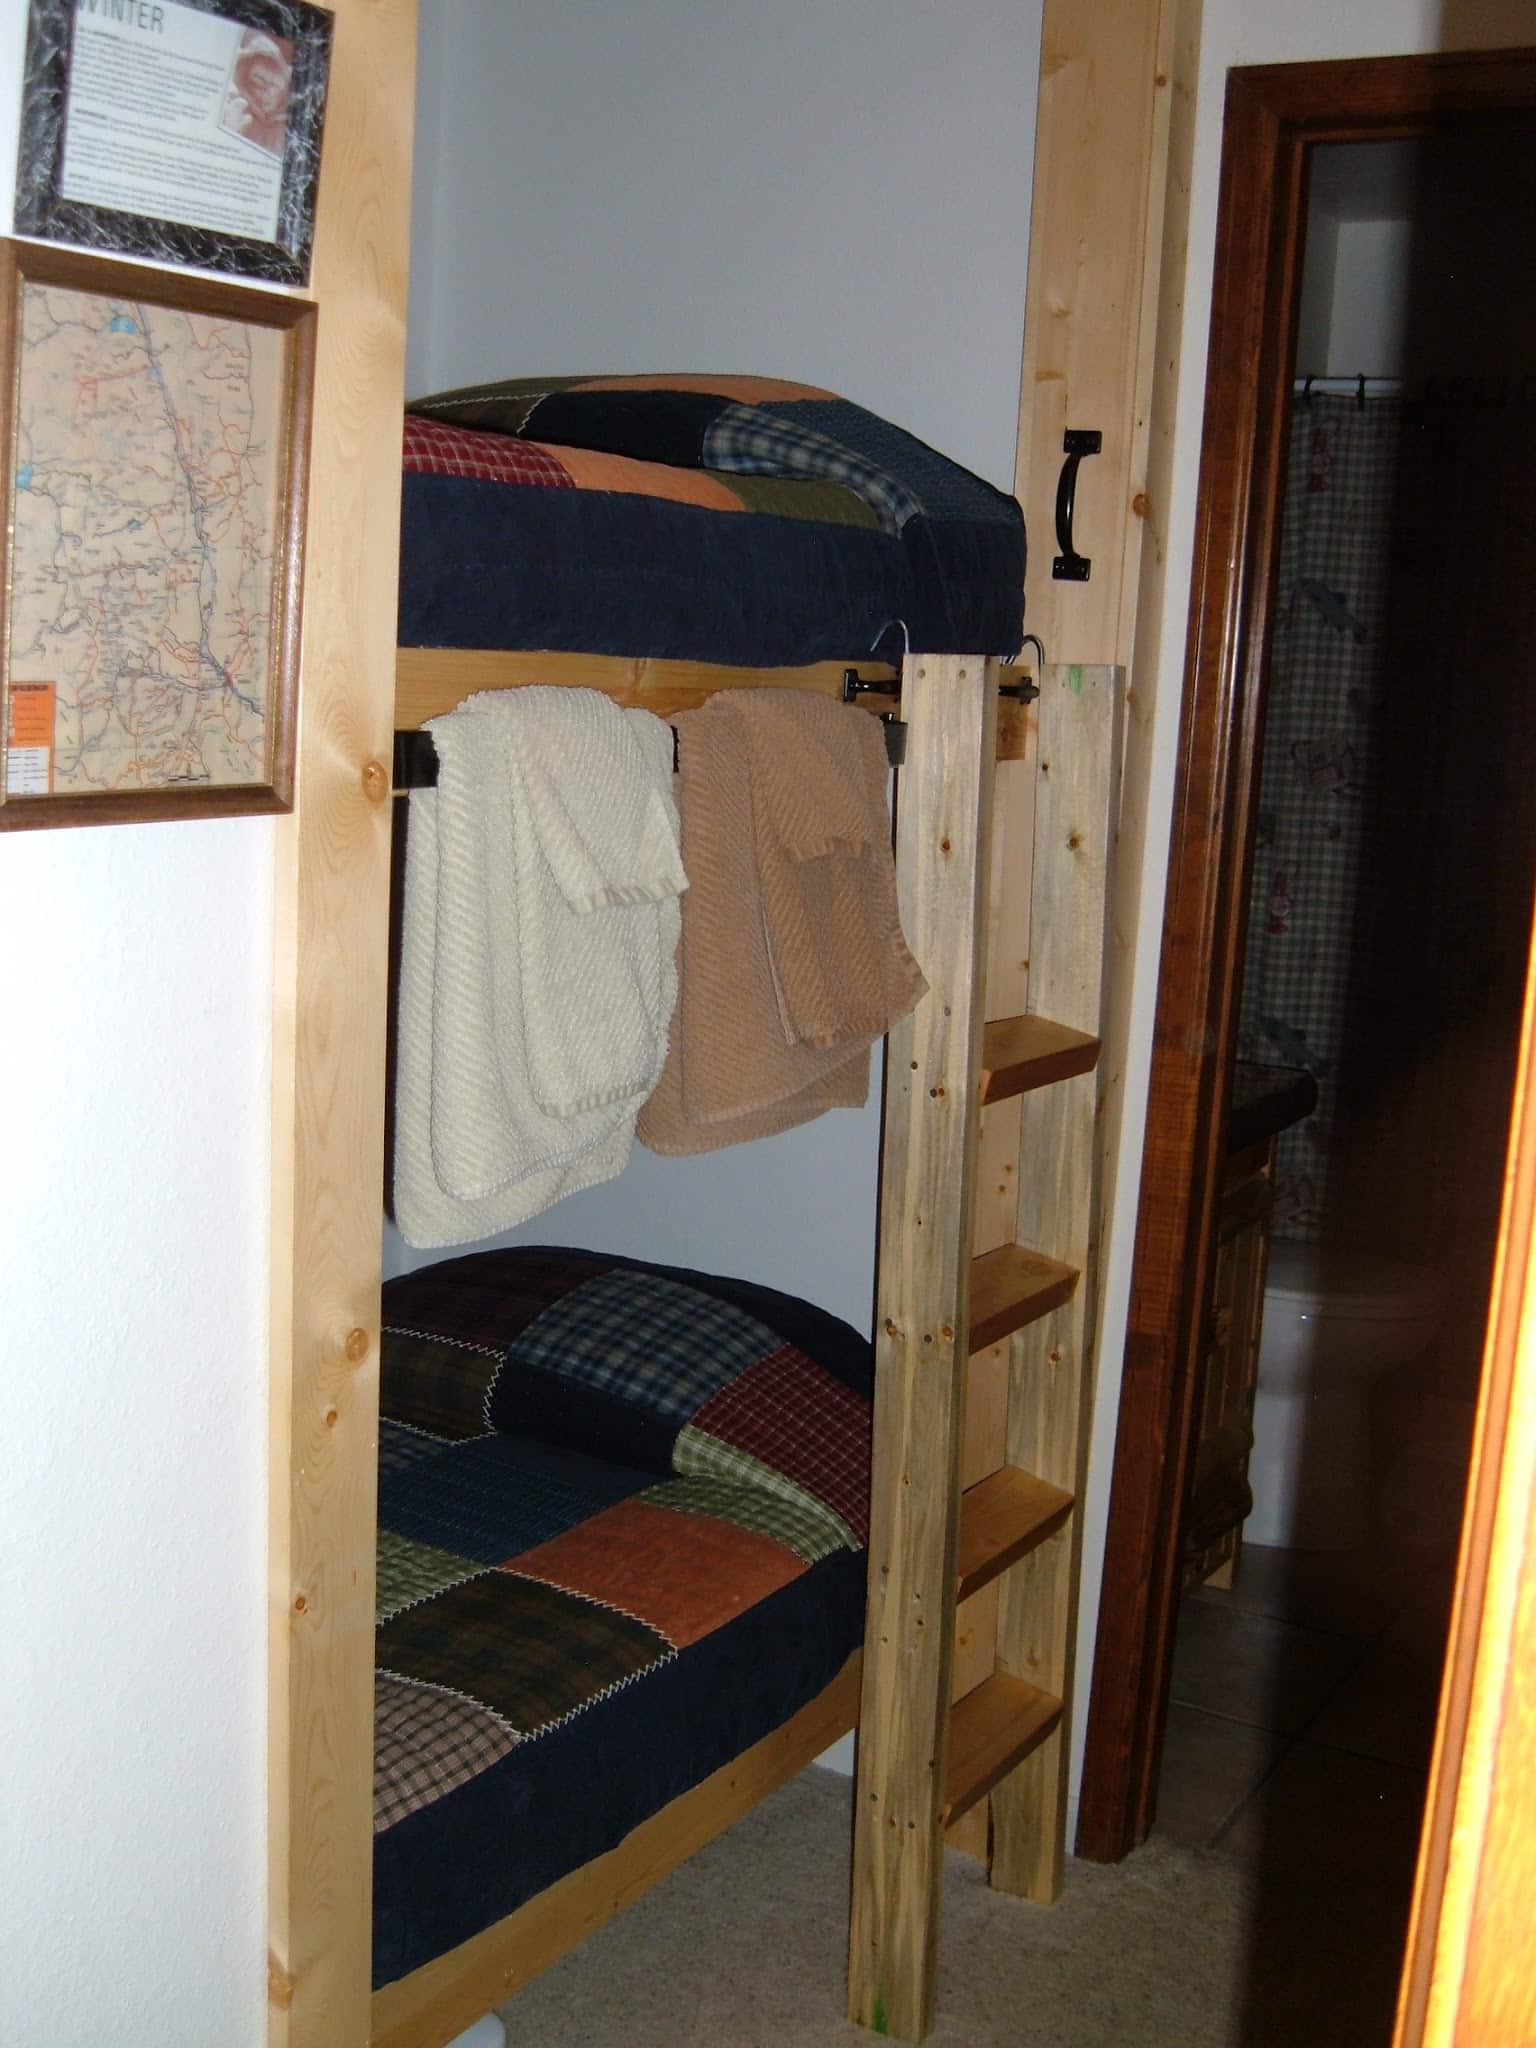 A hallway with bunks built in on the left side.